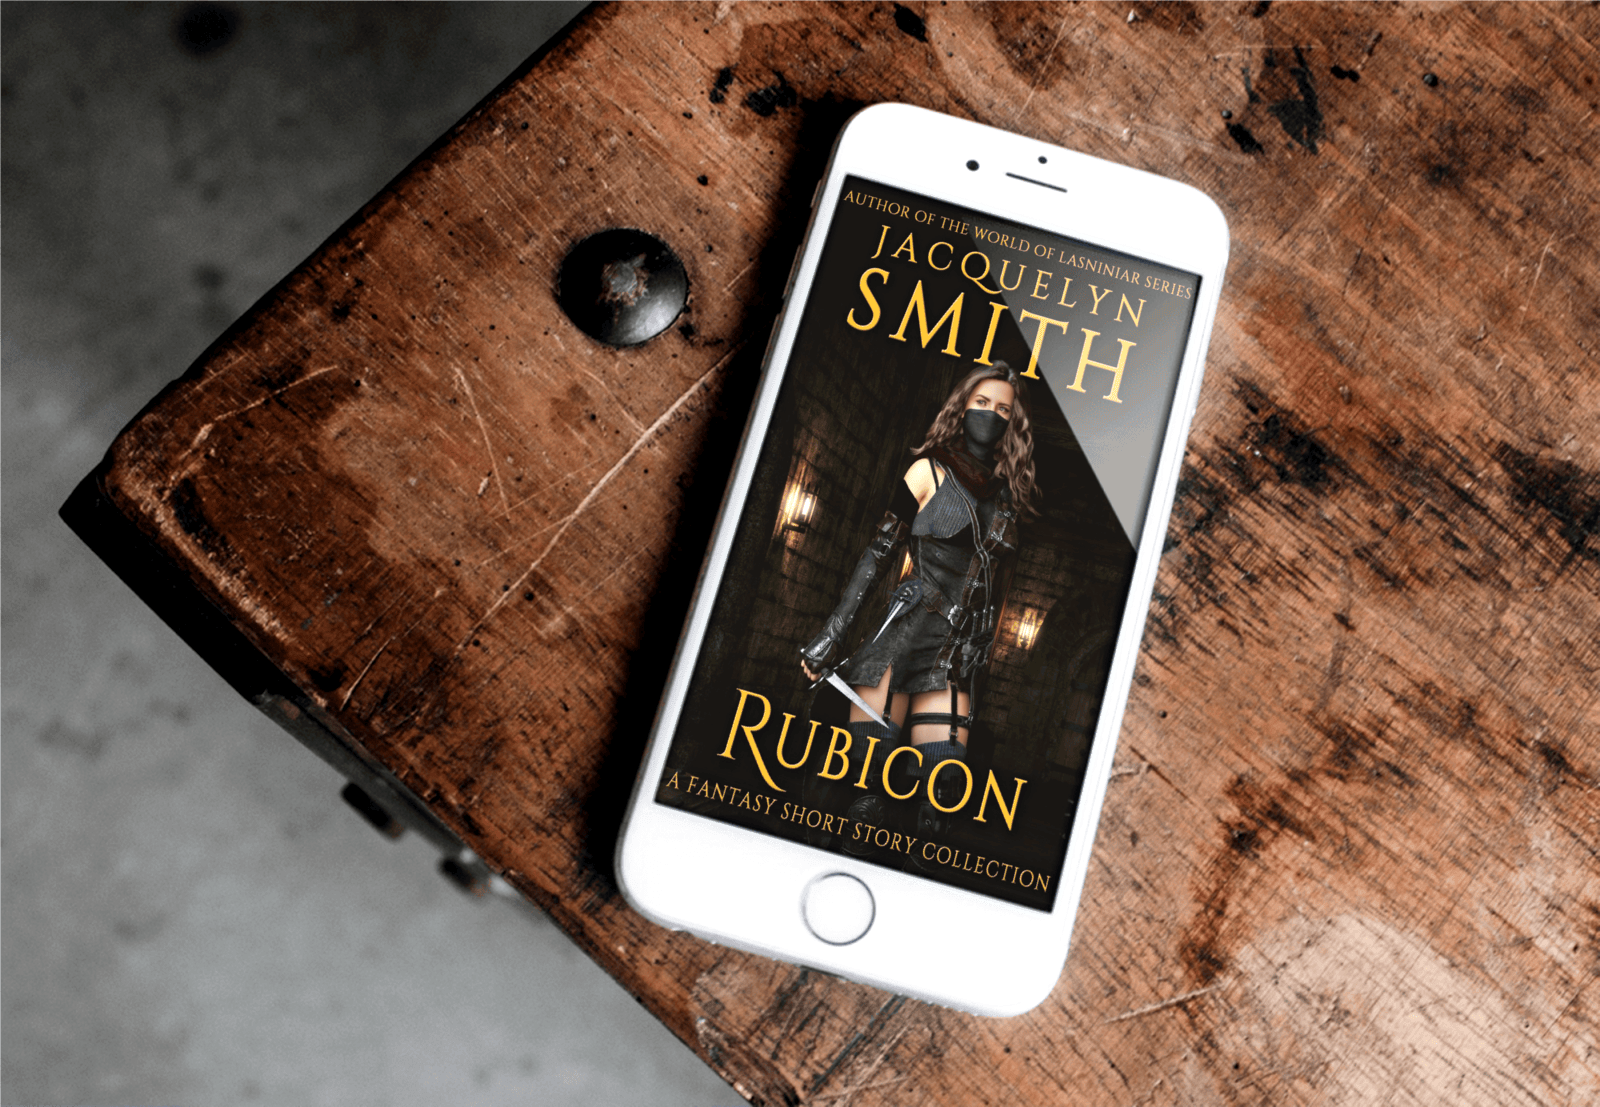 Rubicon a Fantasy Short Story Collection iphone on wooden table